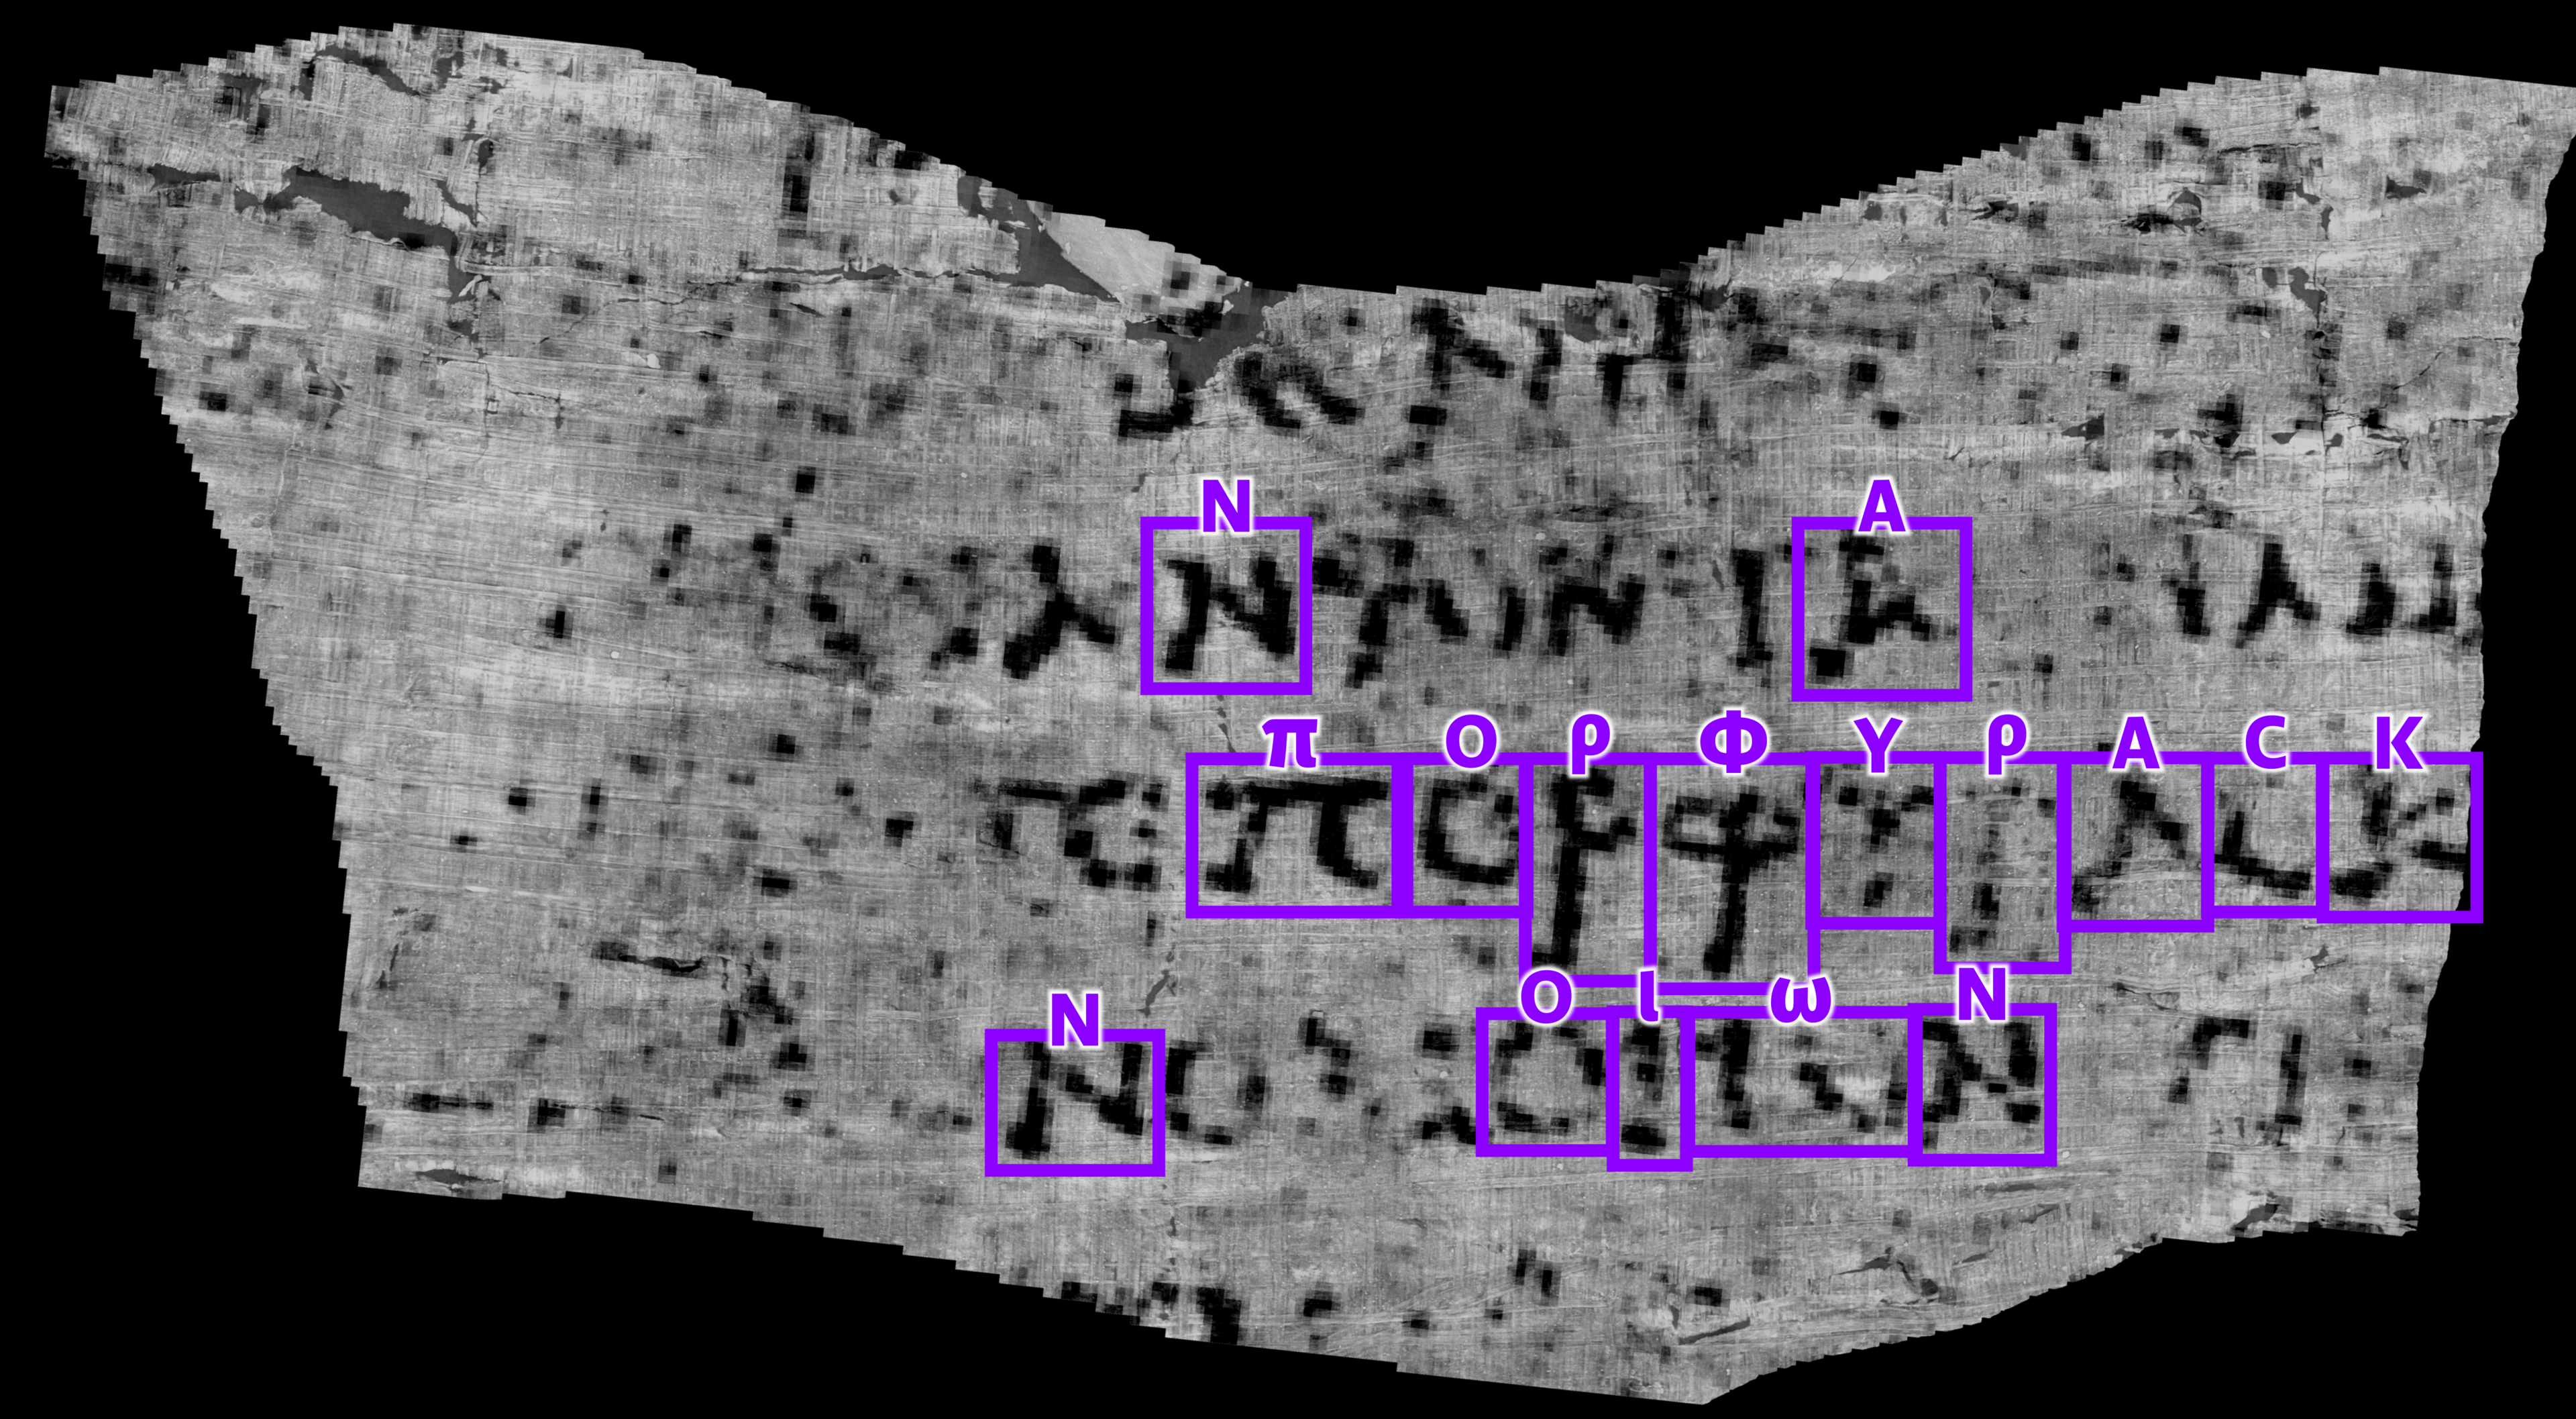 Luke Farritor’s first win came from identifying the word “ΠΟΡΦΥΡΑϹ” (Greek word for "purple") on a Herculaneum scroll.